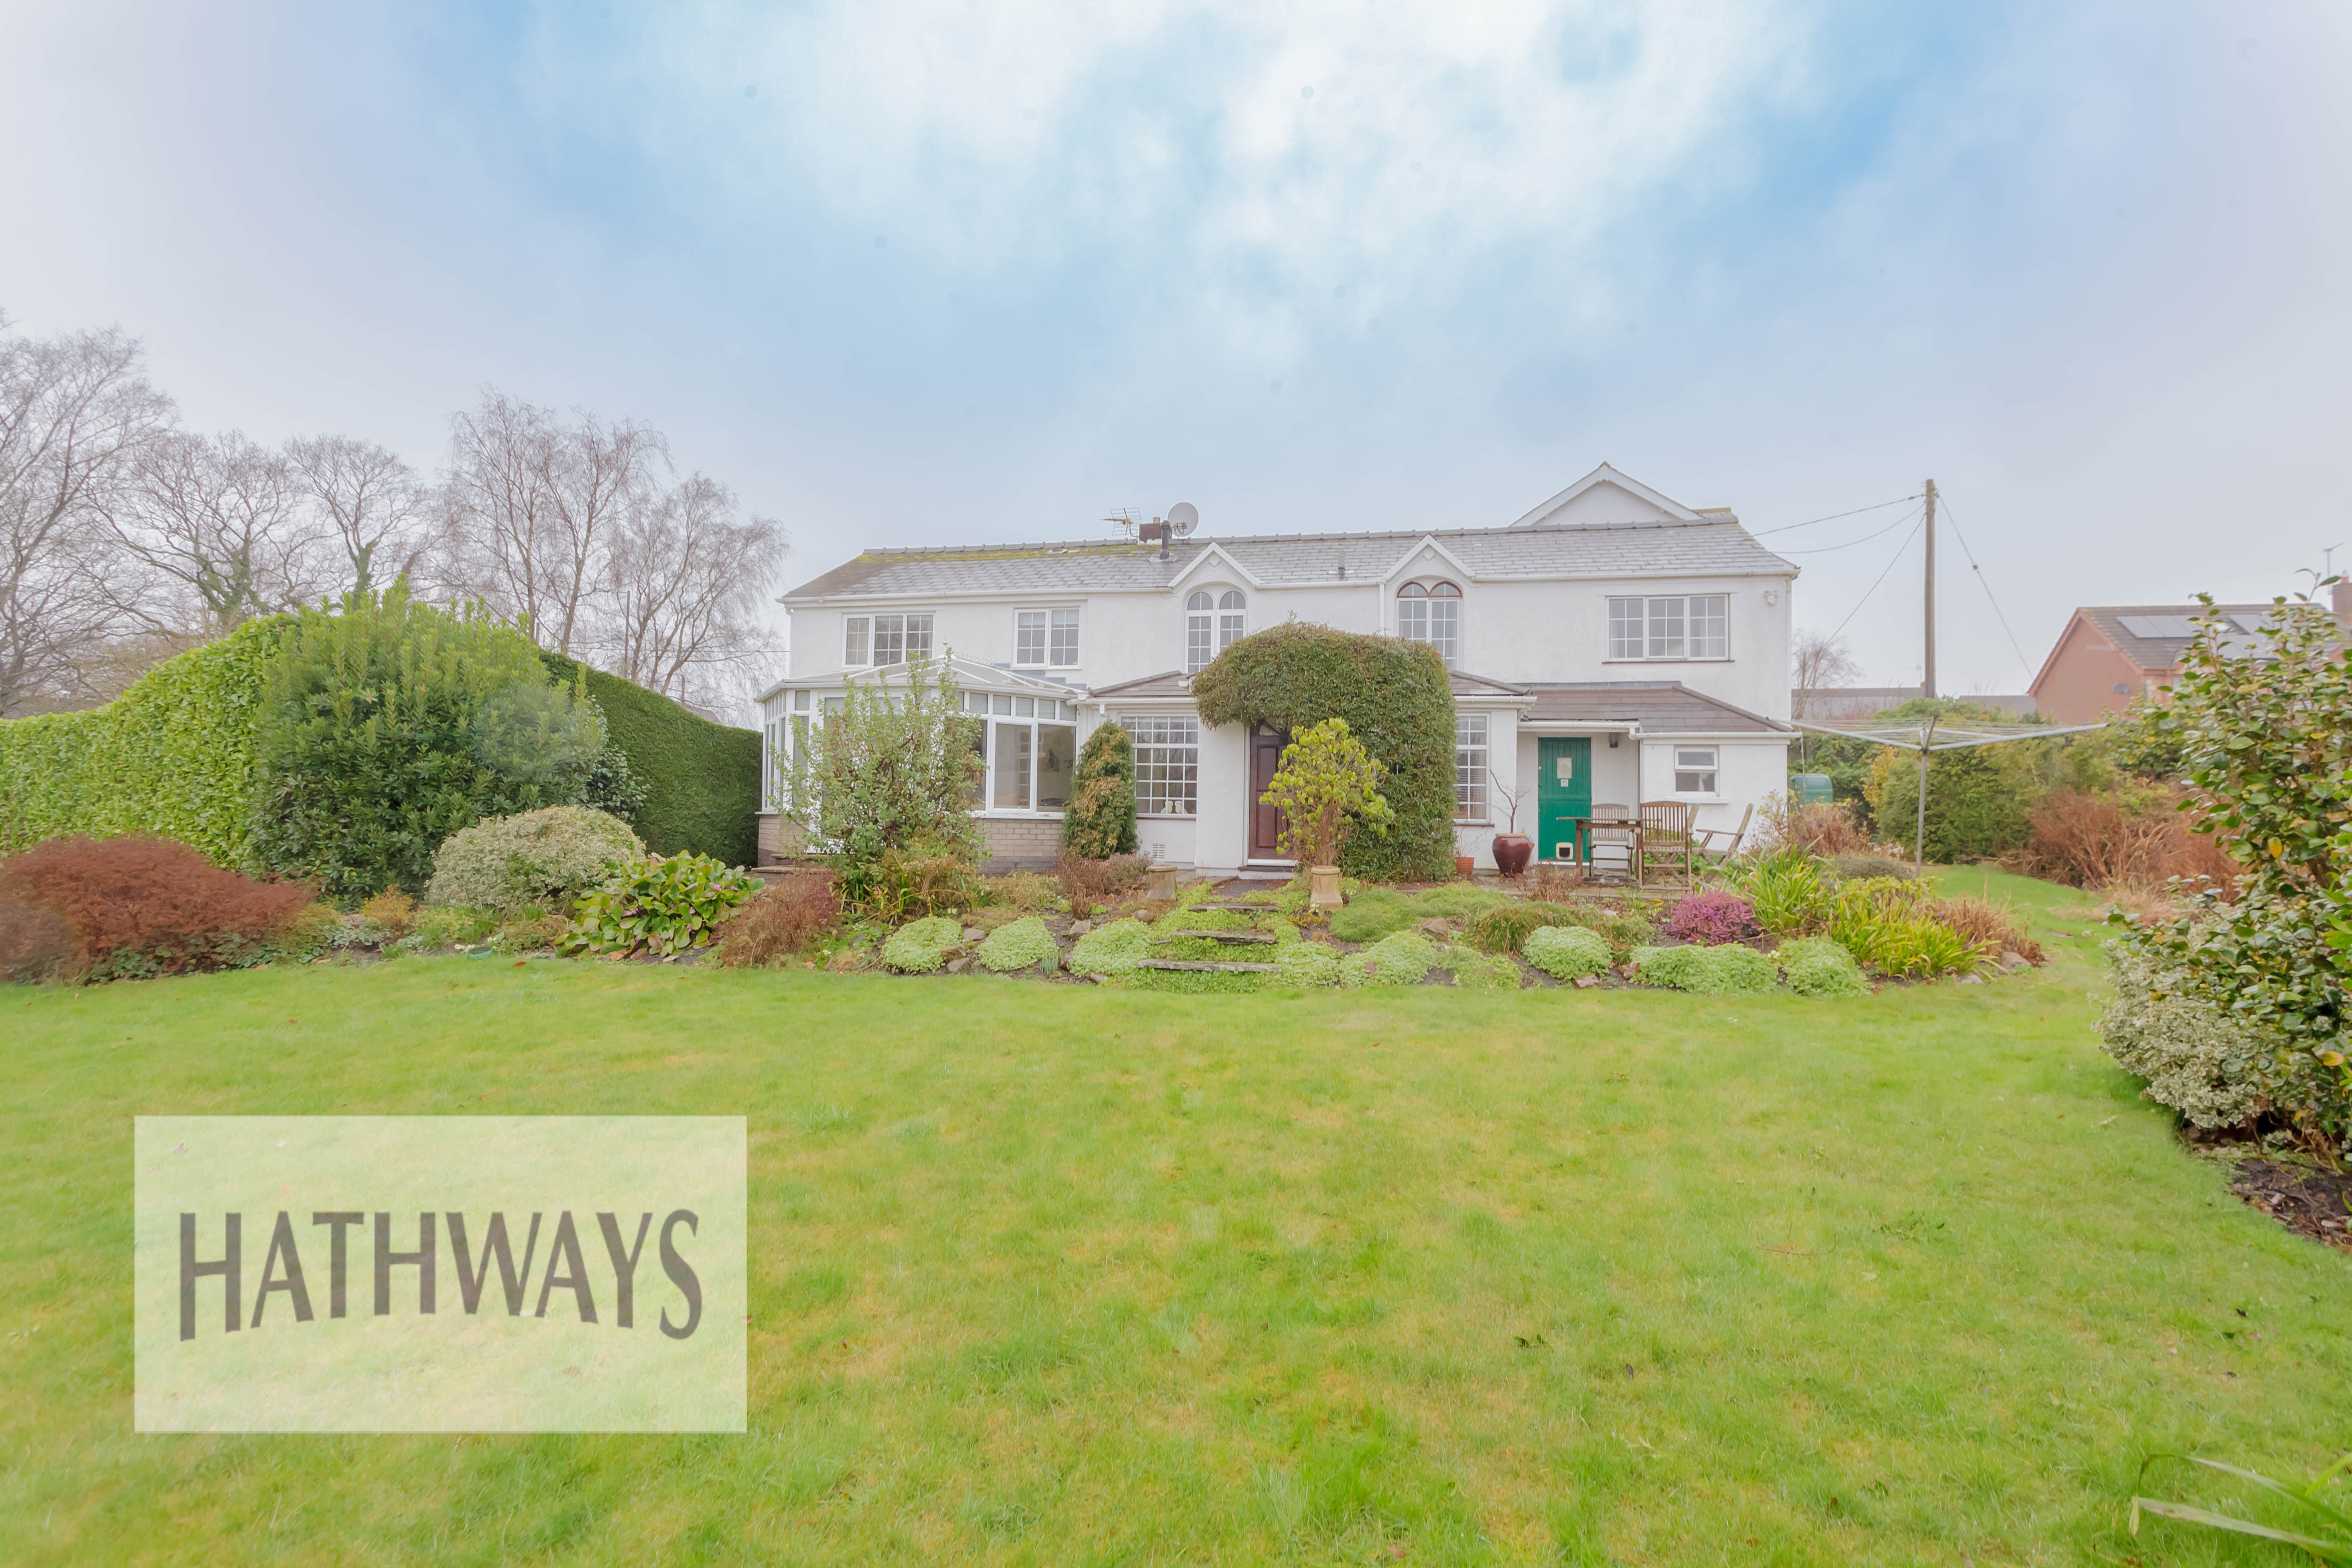 2 bed house for sale in Caerleon Road, Newport - Property Image 1